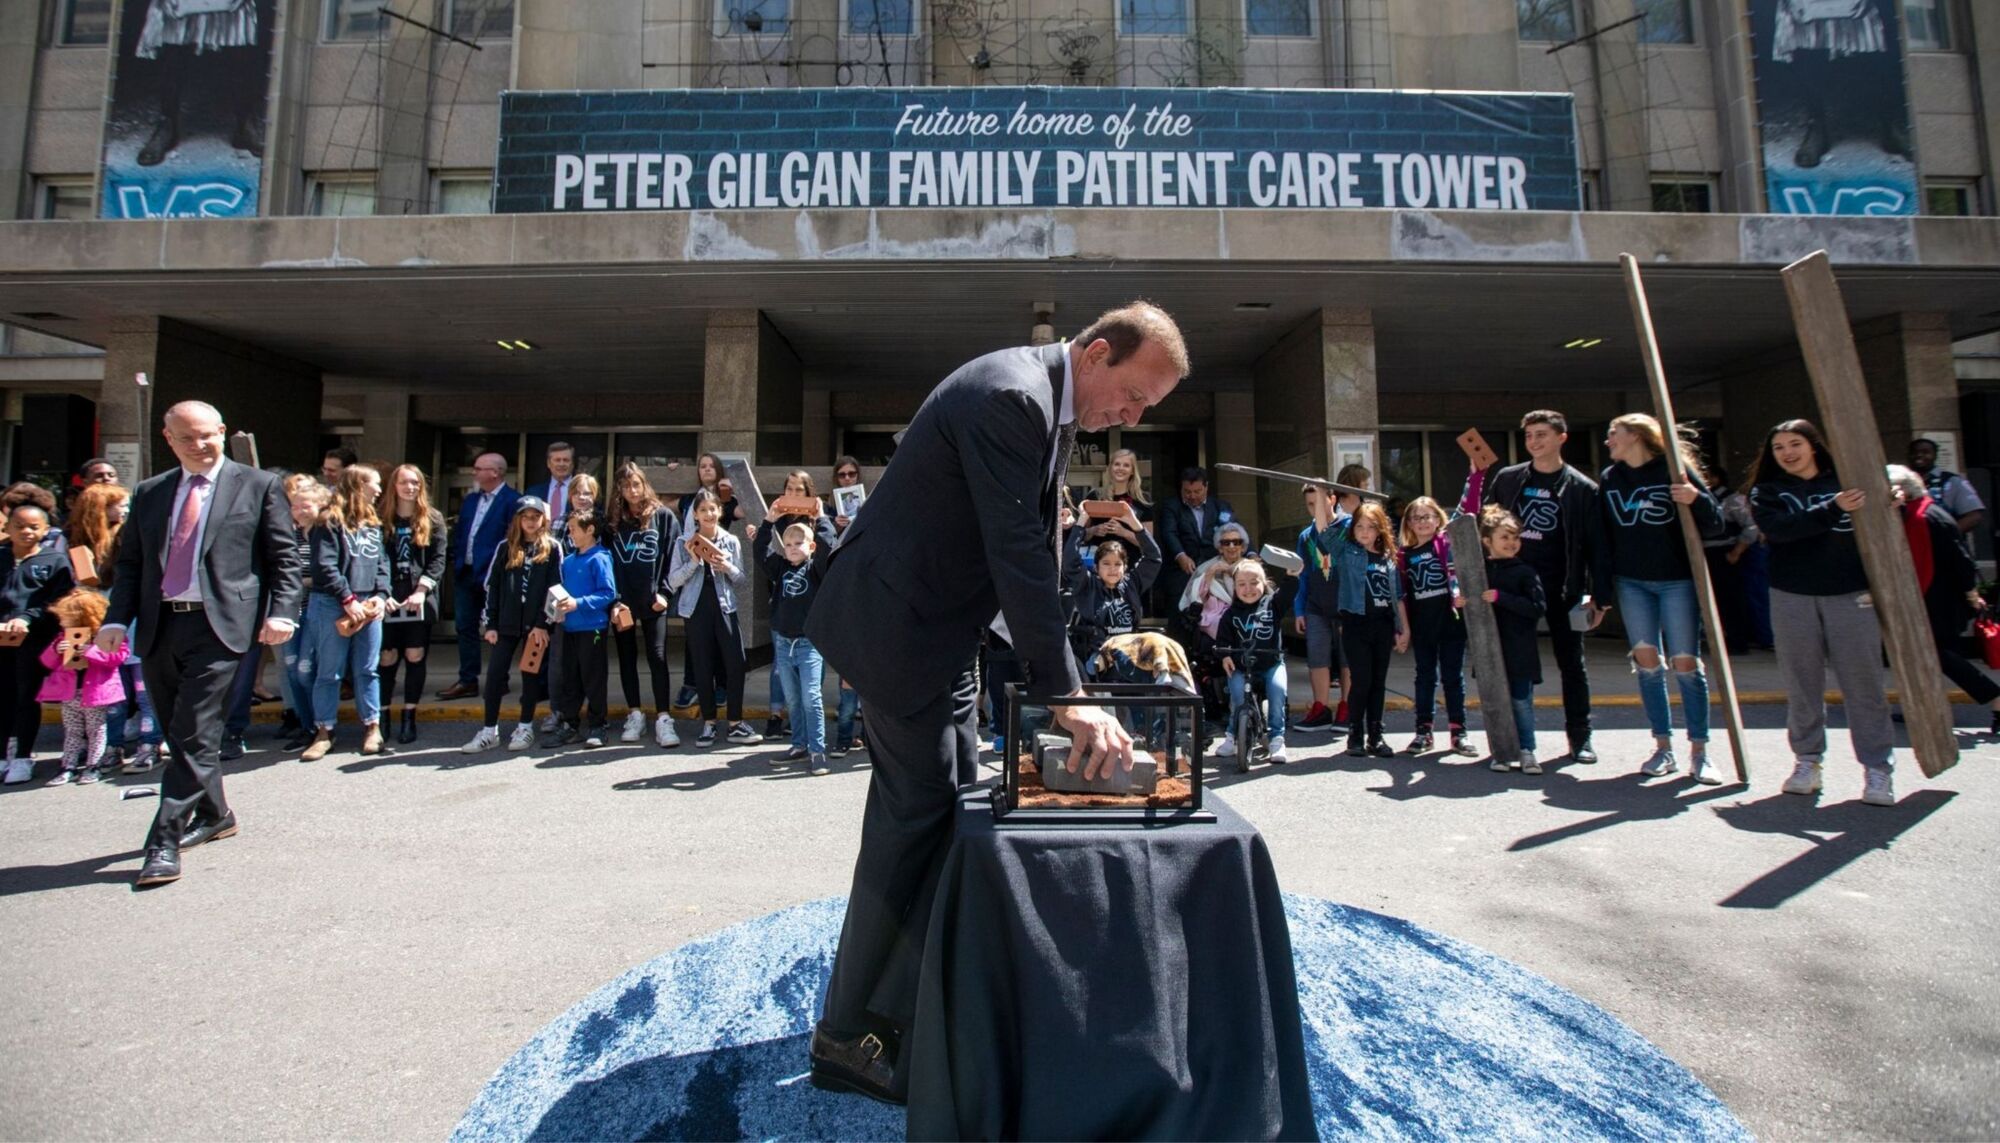 Peter Gilgan at Peter Gilgan Family Patient Care Tower outdoor ceremony